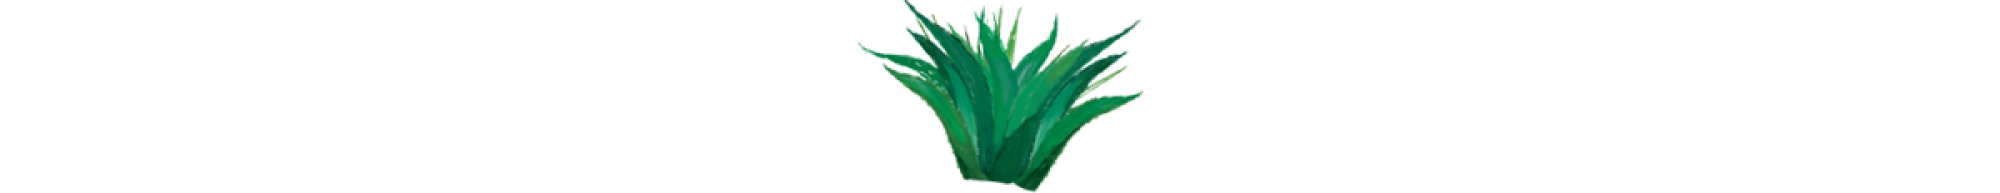 An illustration of agave